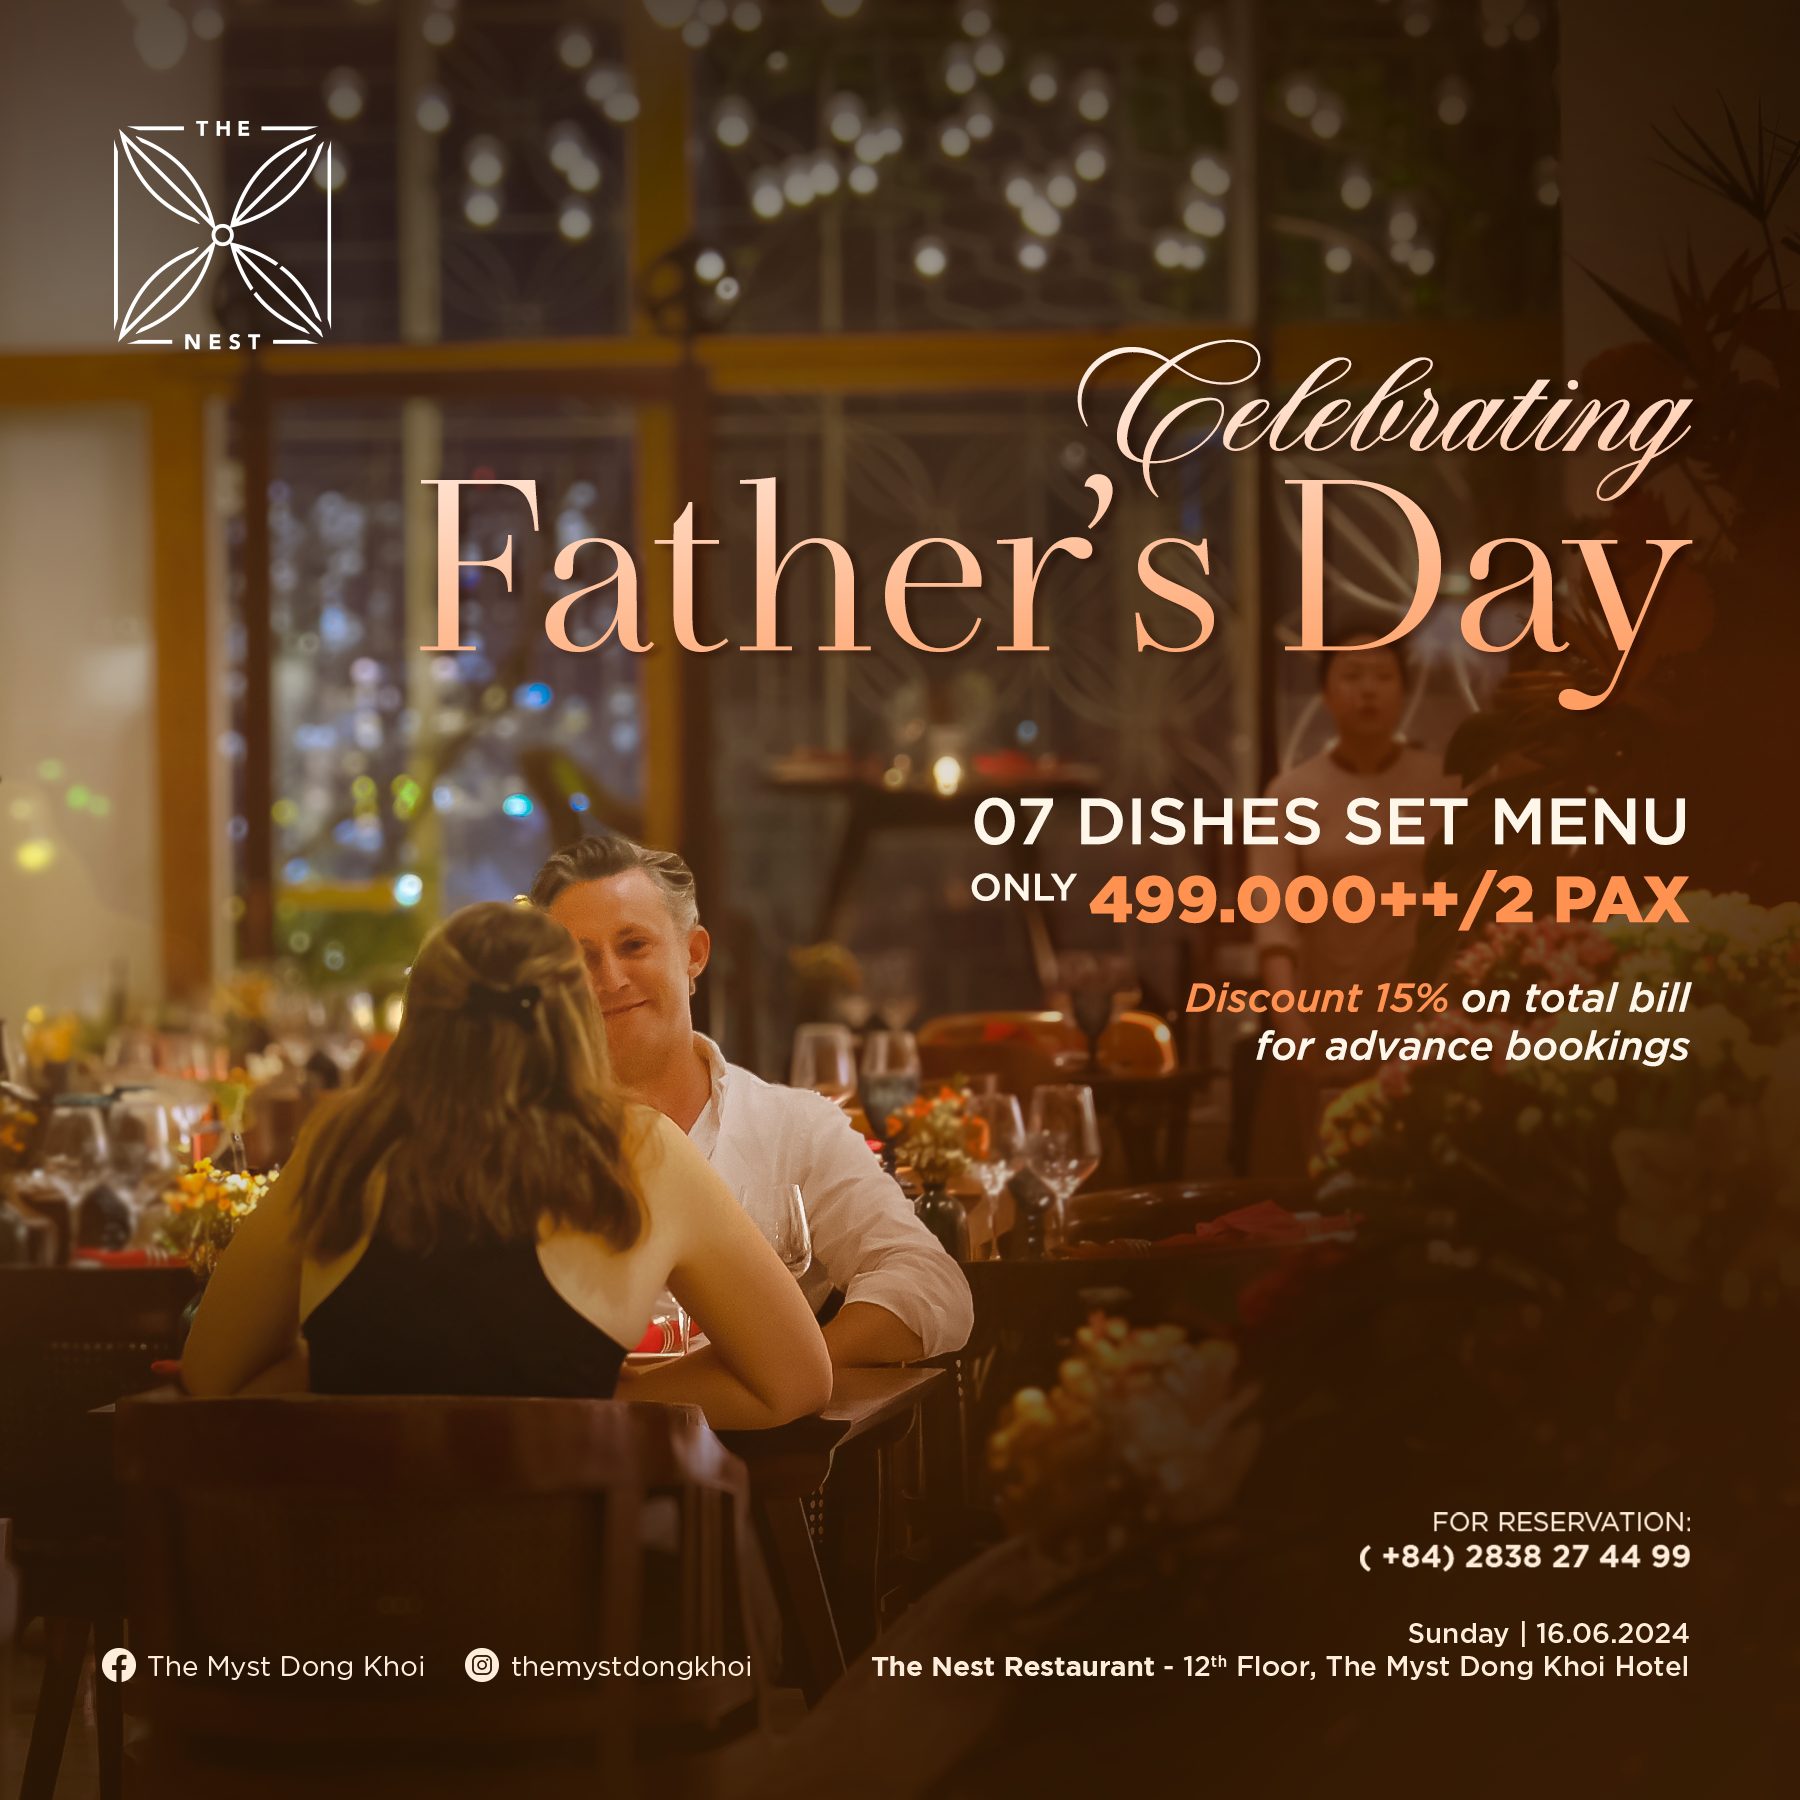 THE MYST DONG KHOI – Celebrate Father’s Day With Us 16.06